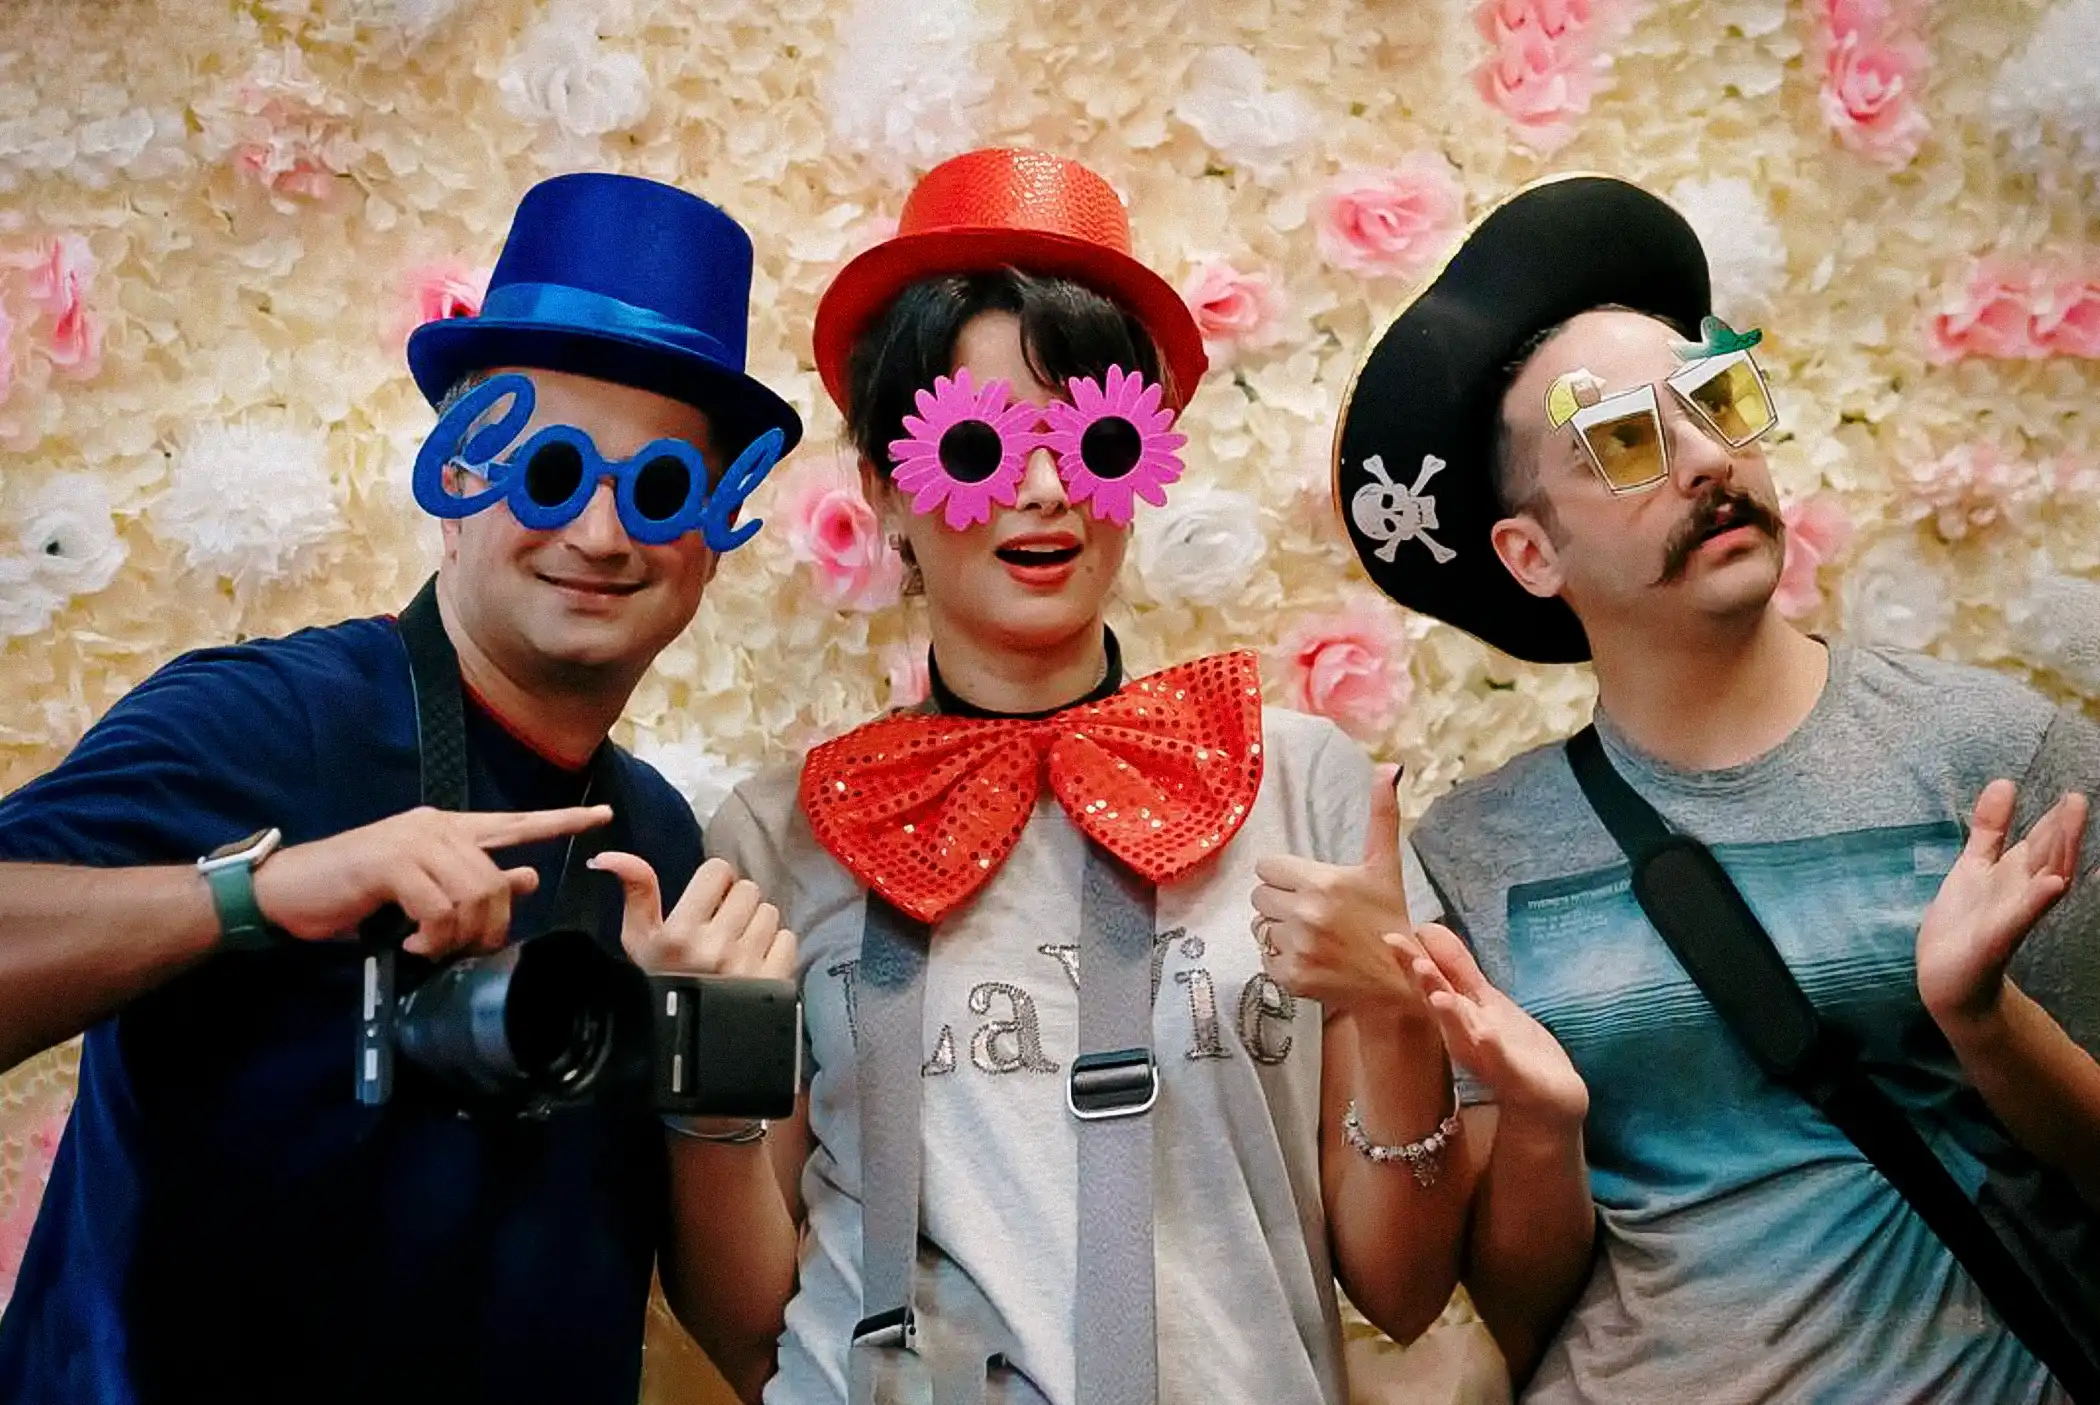 HAPfilm team members in colorful costumes and props at a photo booth during a New Zealand wedding